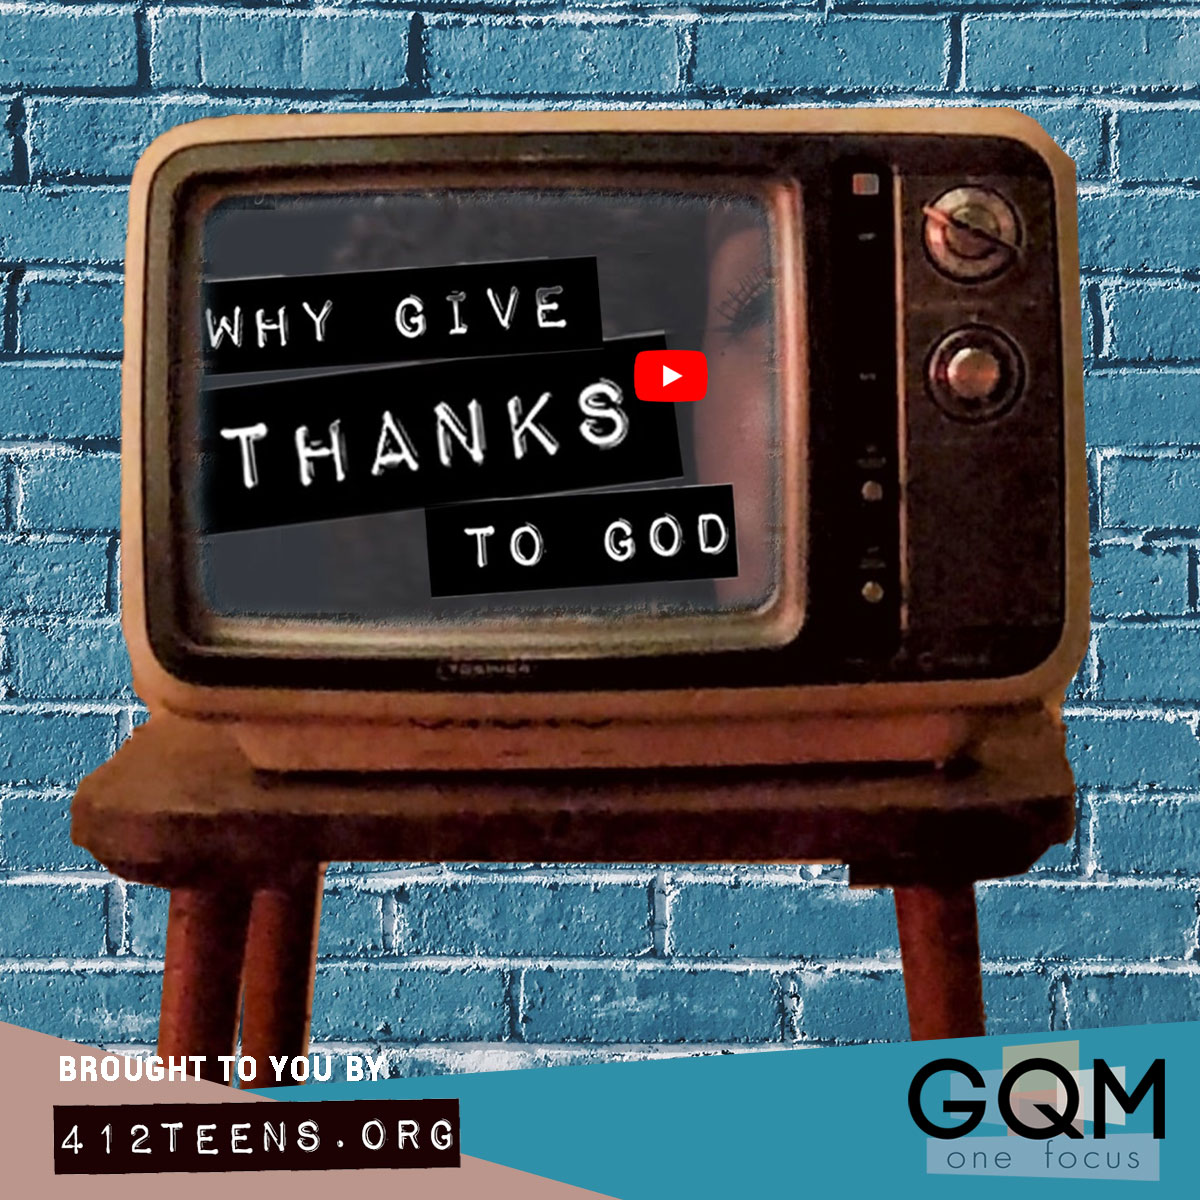 Why should we give thanks to God?